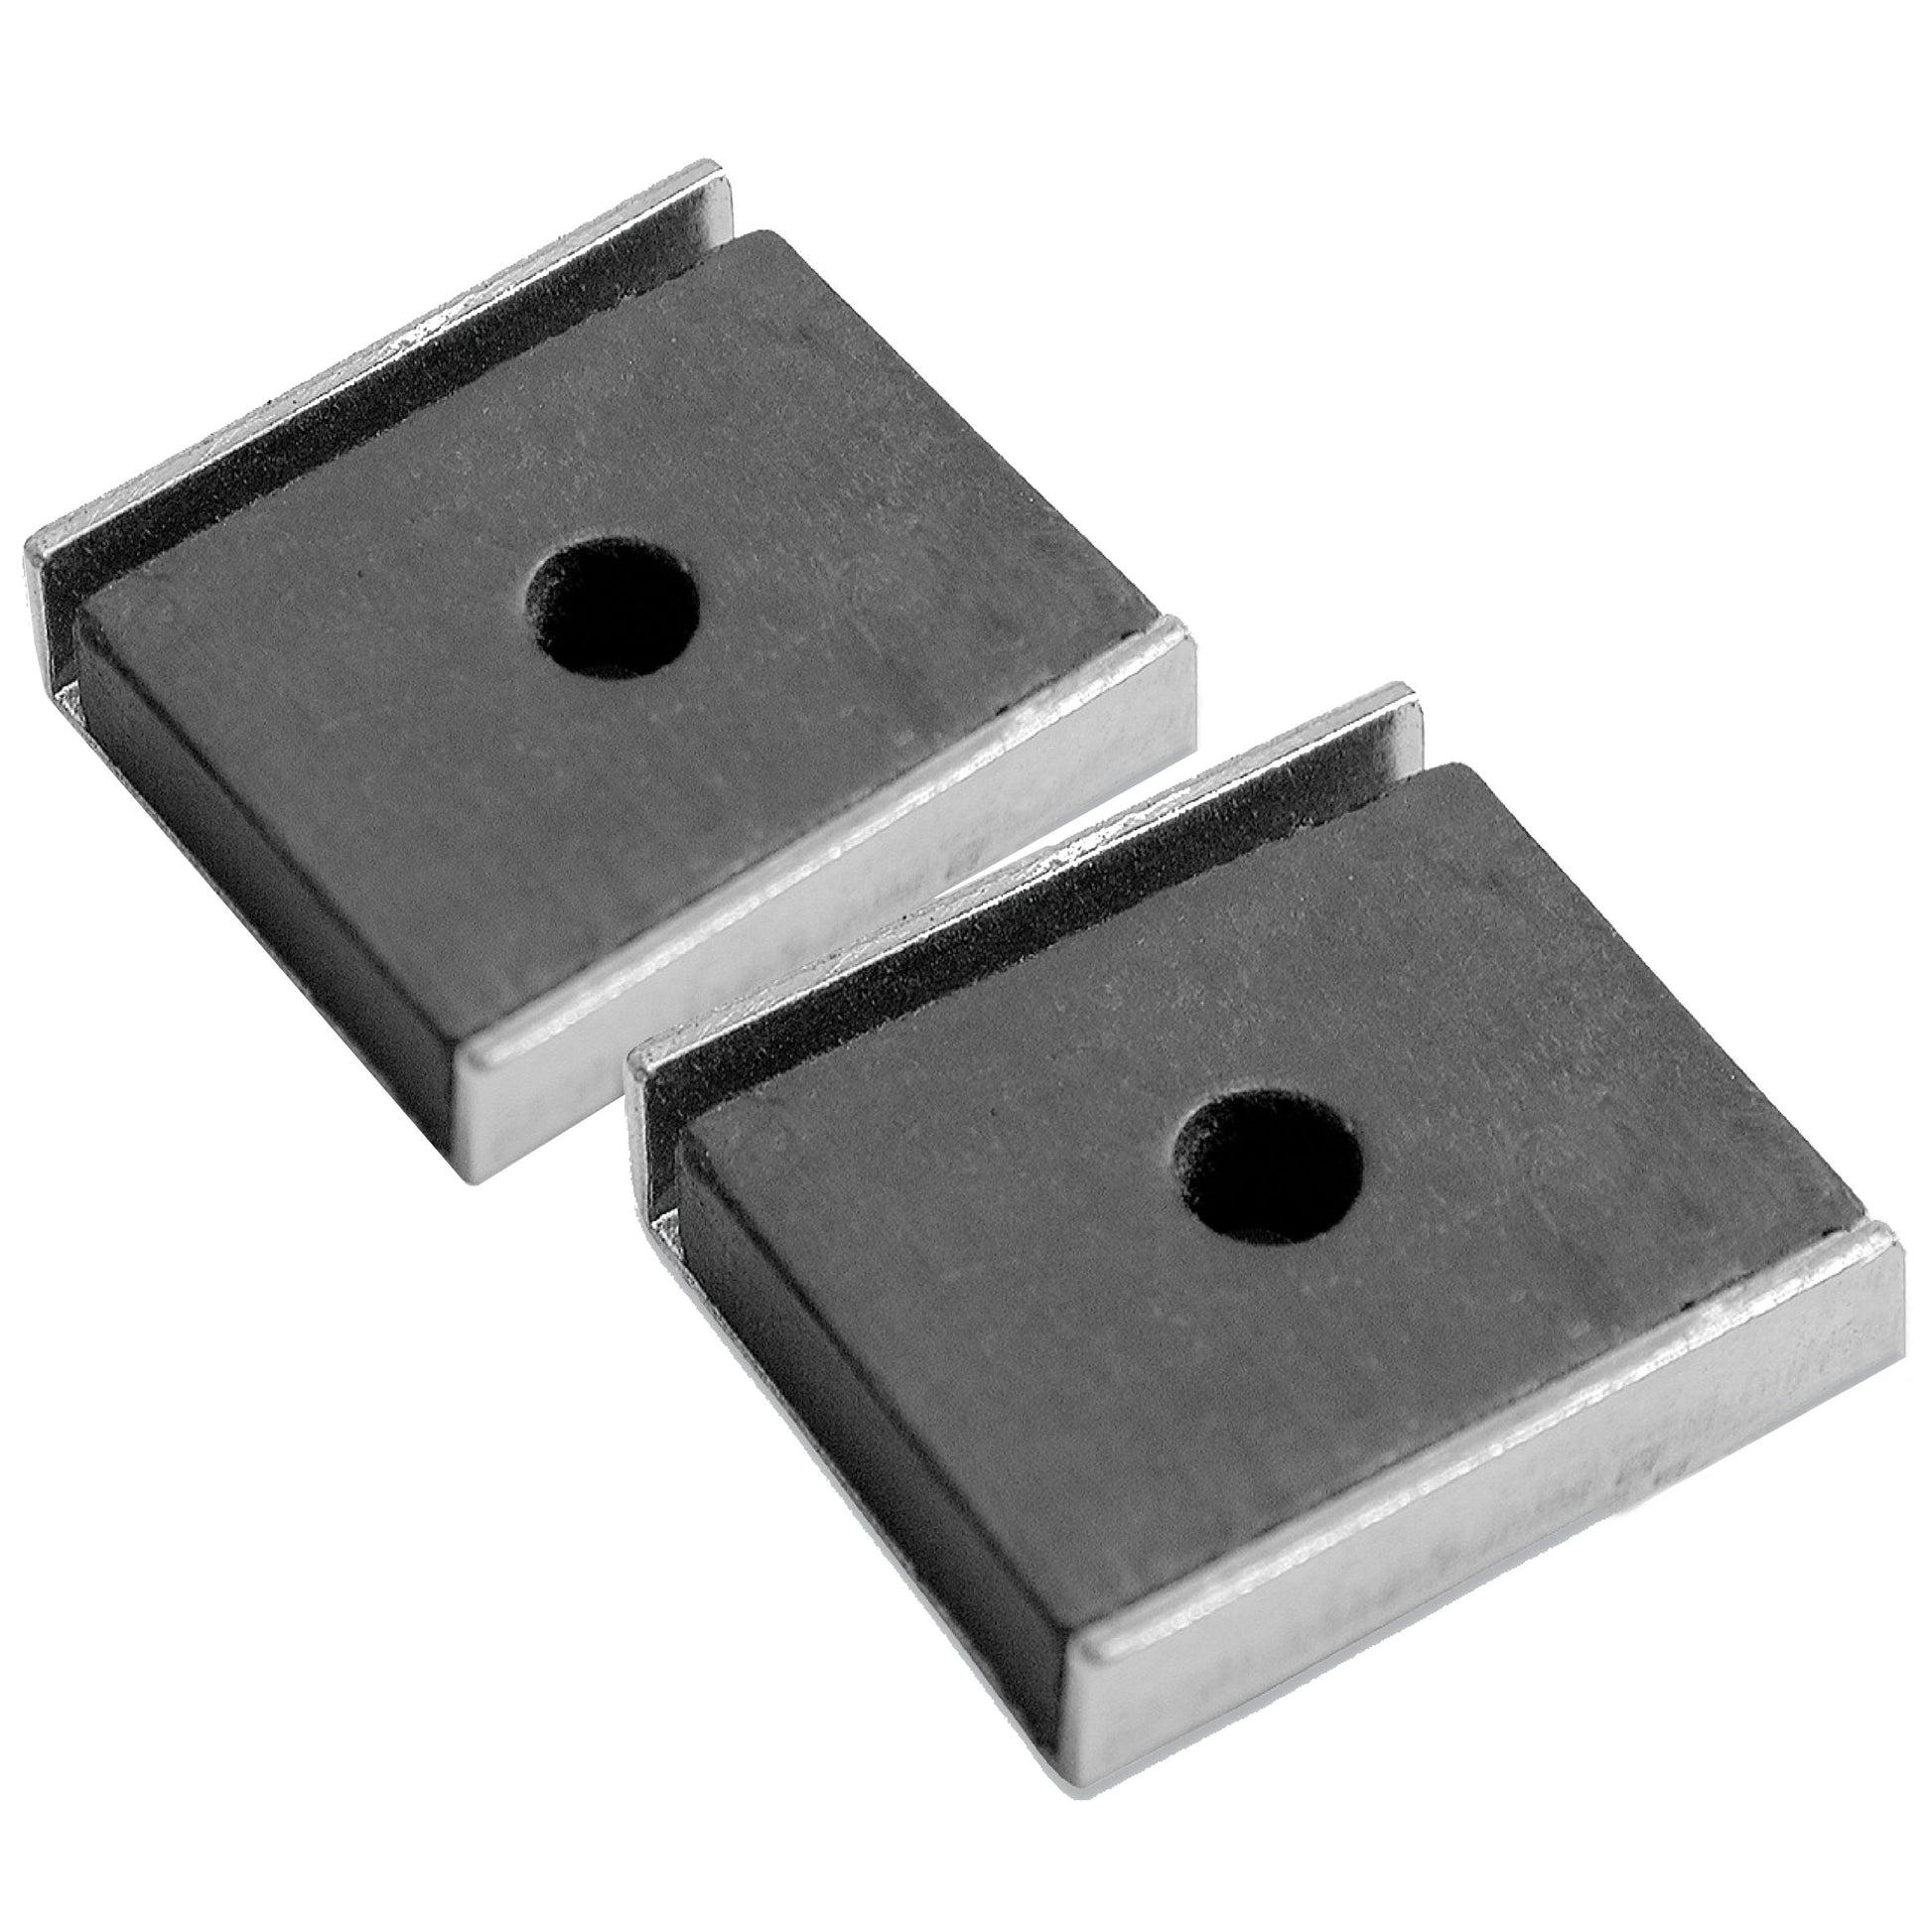 Load image into Gallery viewer, 07220 Ceramic Latch Magnet Channel Assemblies (2pk) - 45 Degree Angle View